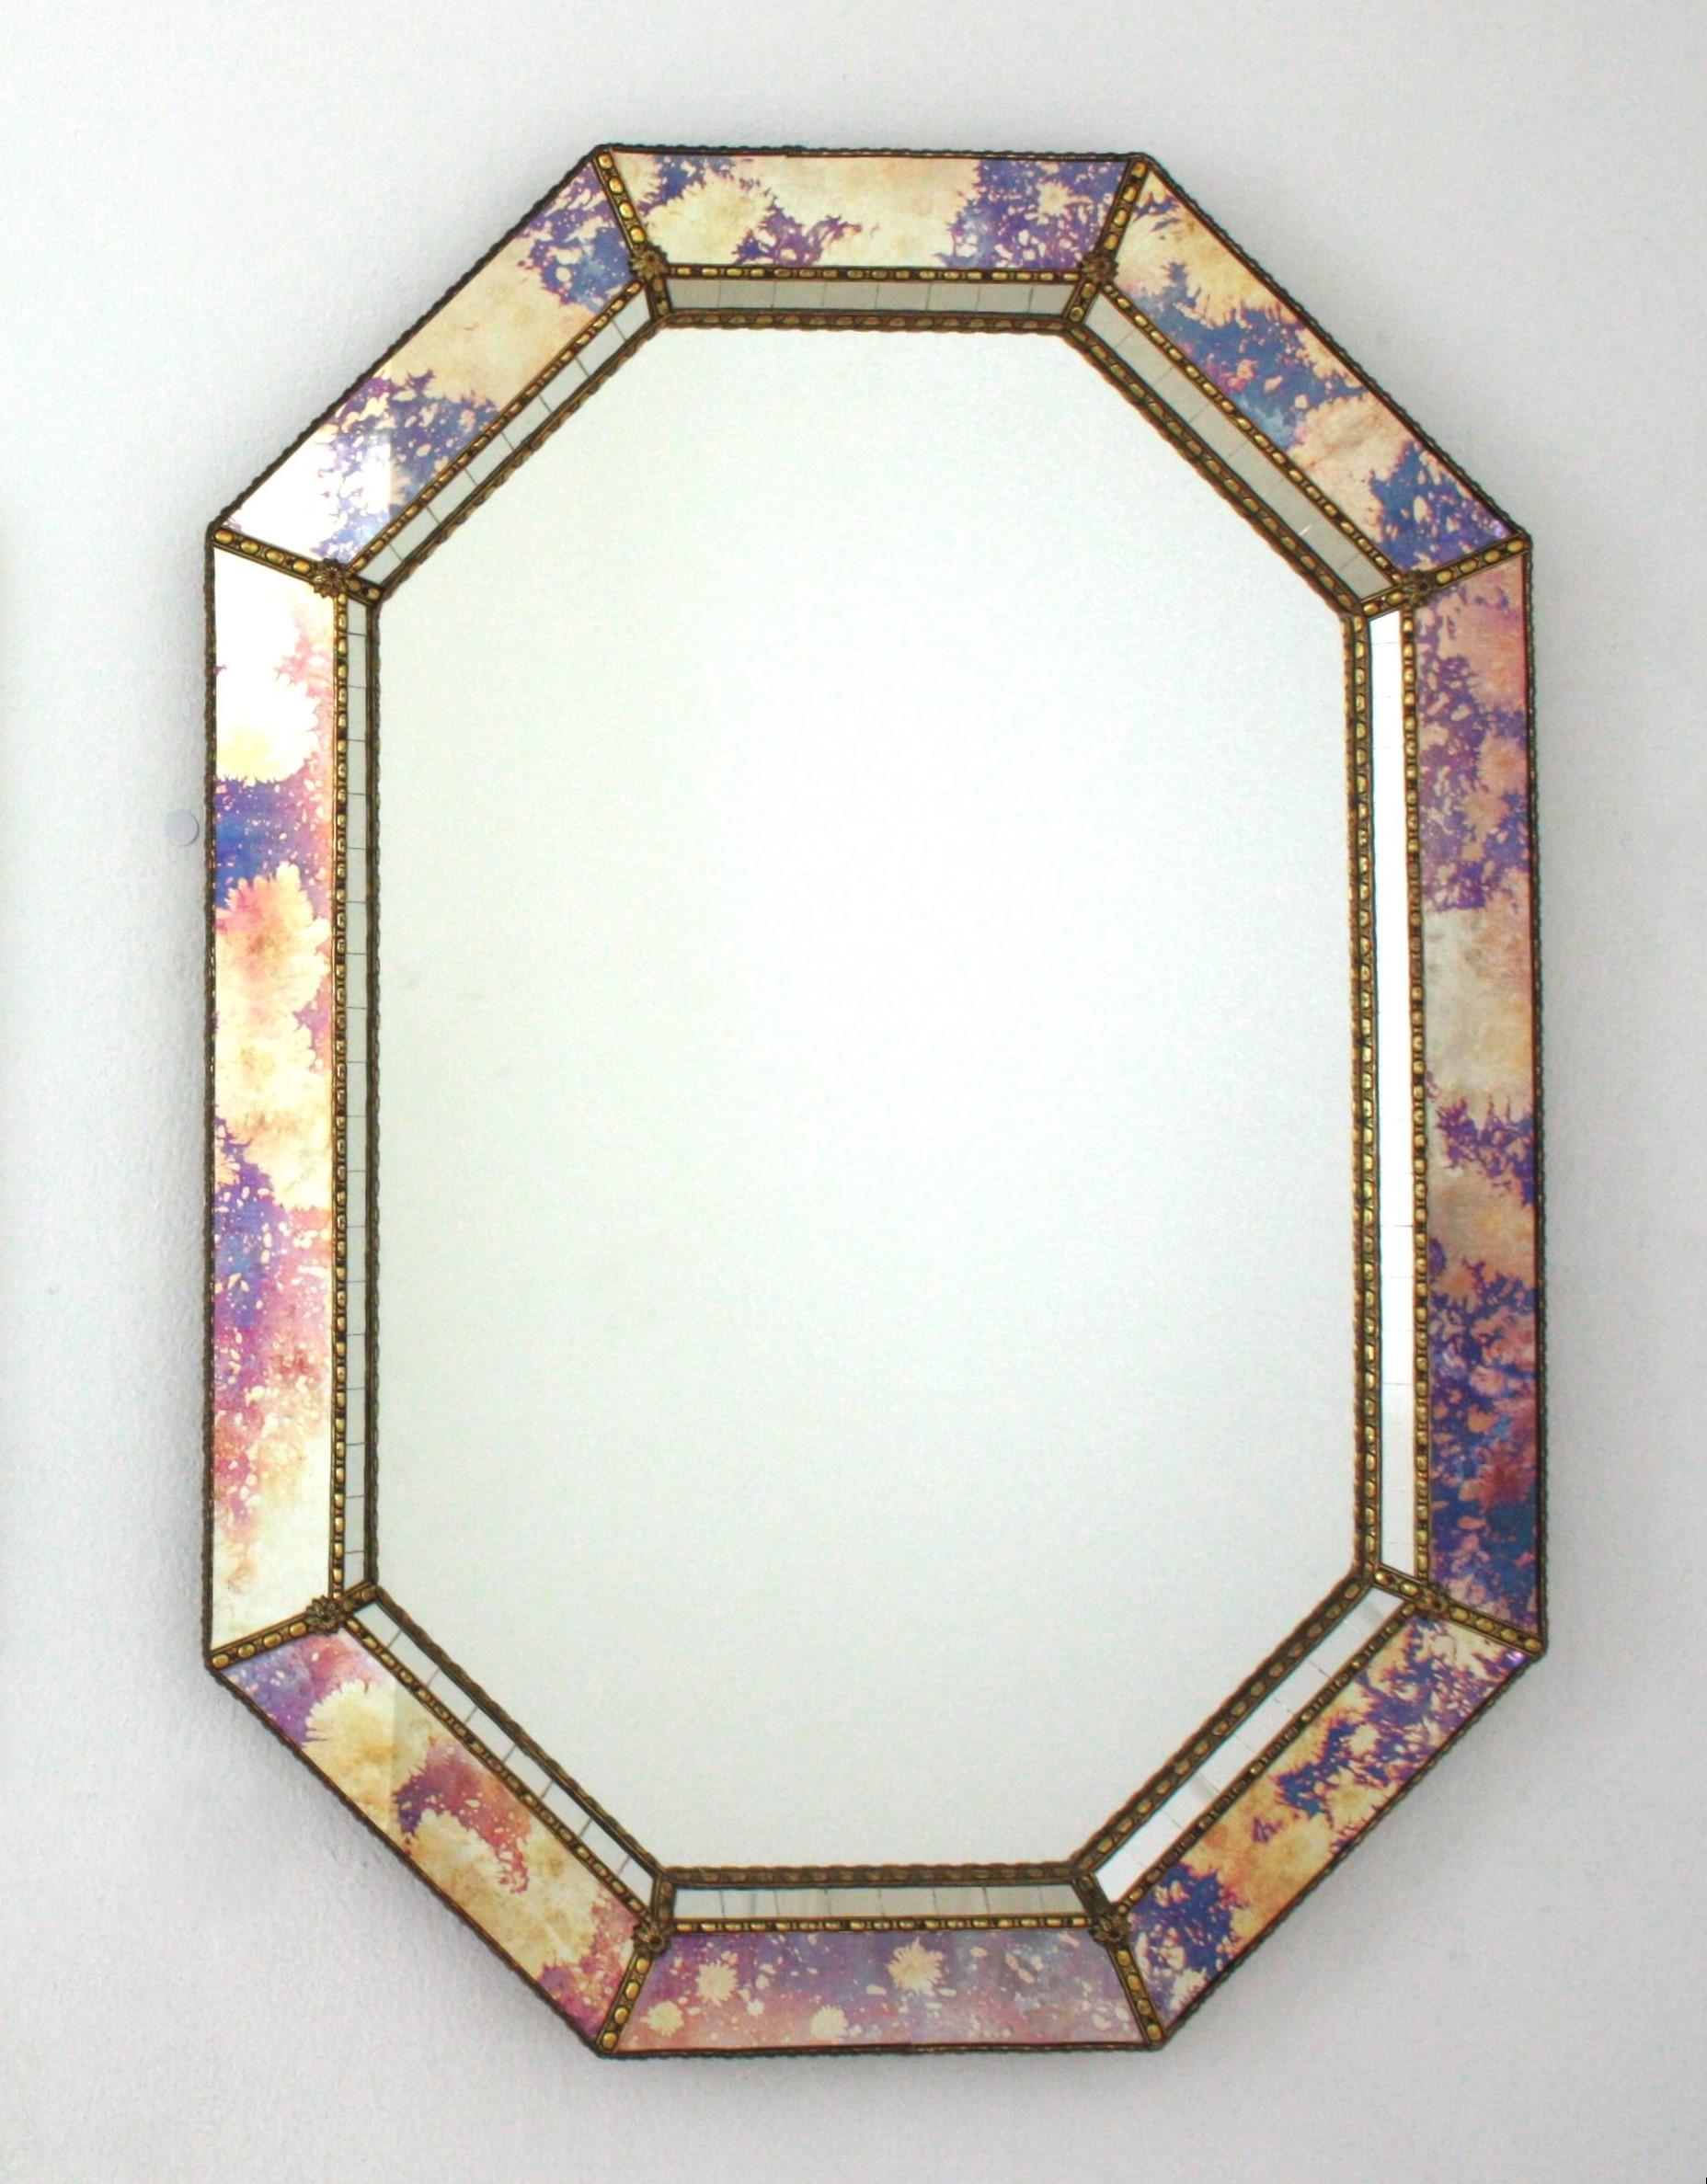 Hollywood Regency Octagonal Venetian Style Mirrors with Pink Purple Glass & Brass Details, Pair For Sale